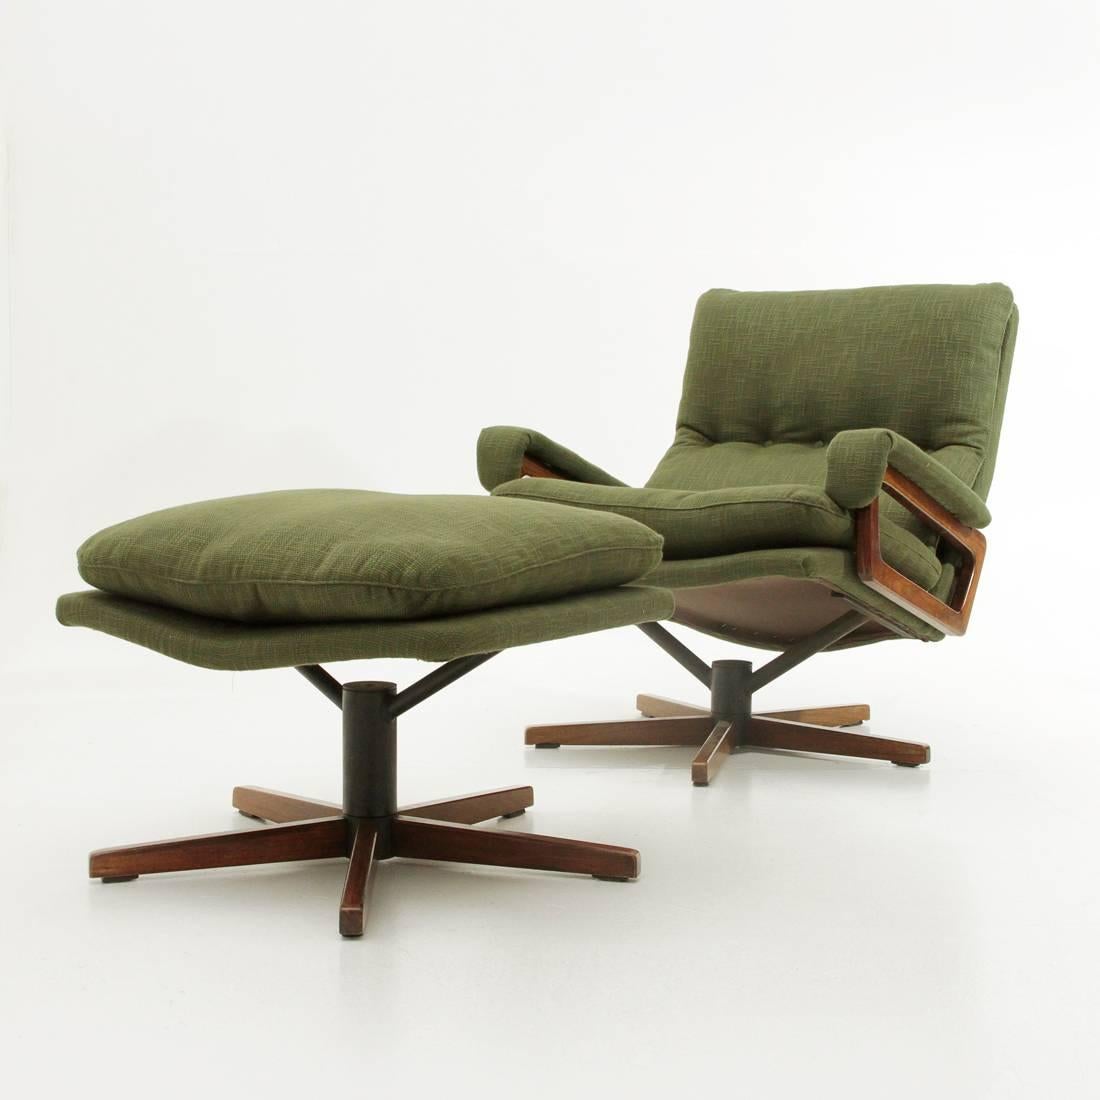 Armchair produced in the 1970s by the Swiss company Strassle based on a design by the Belgian designer Andre Vandenbeuck.
Swivel base in black painted metal with wood inserts.
Seat and armrests in wood upholstered and lined in new green